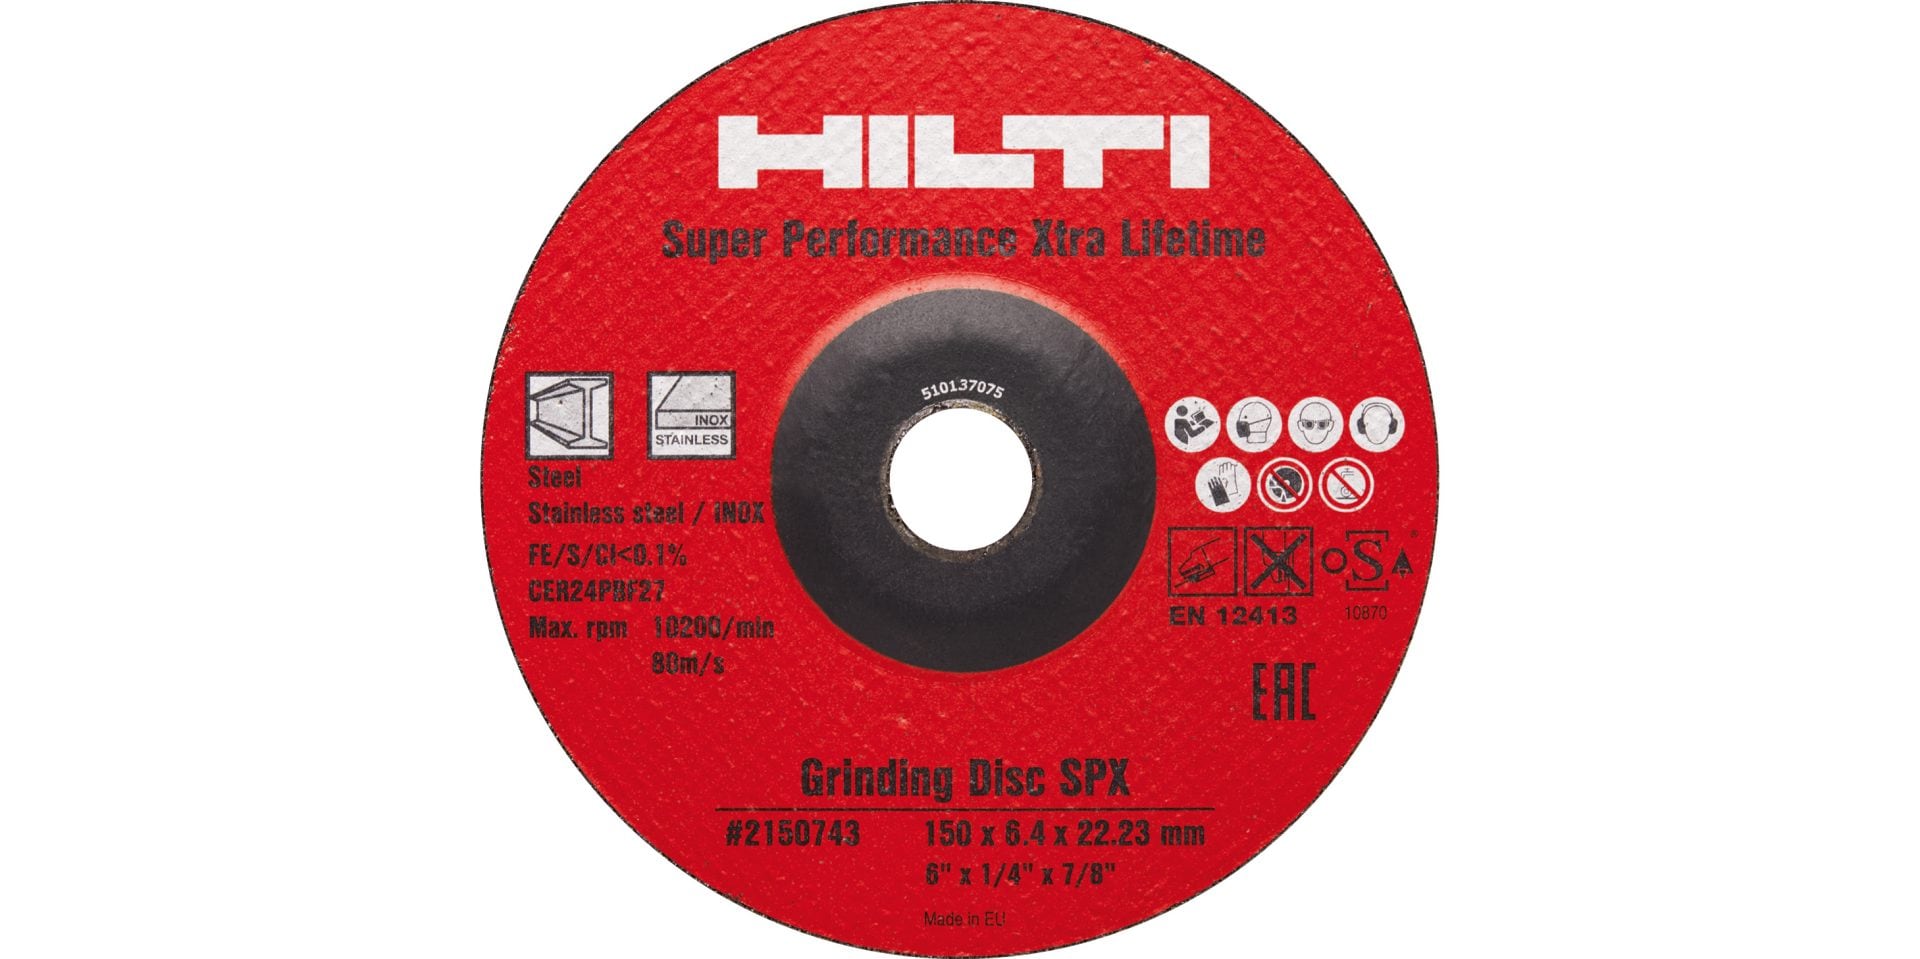 Ultimate abrasive grinding disc for metals featuring super-high removal rate and extra-long lifetime